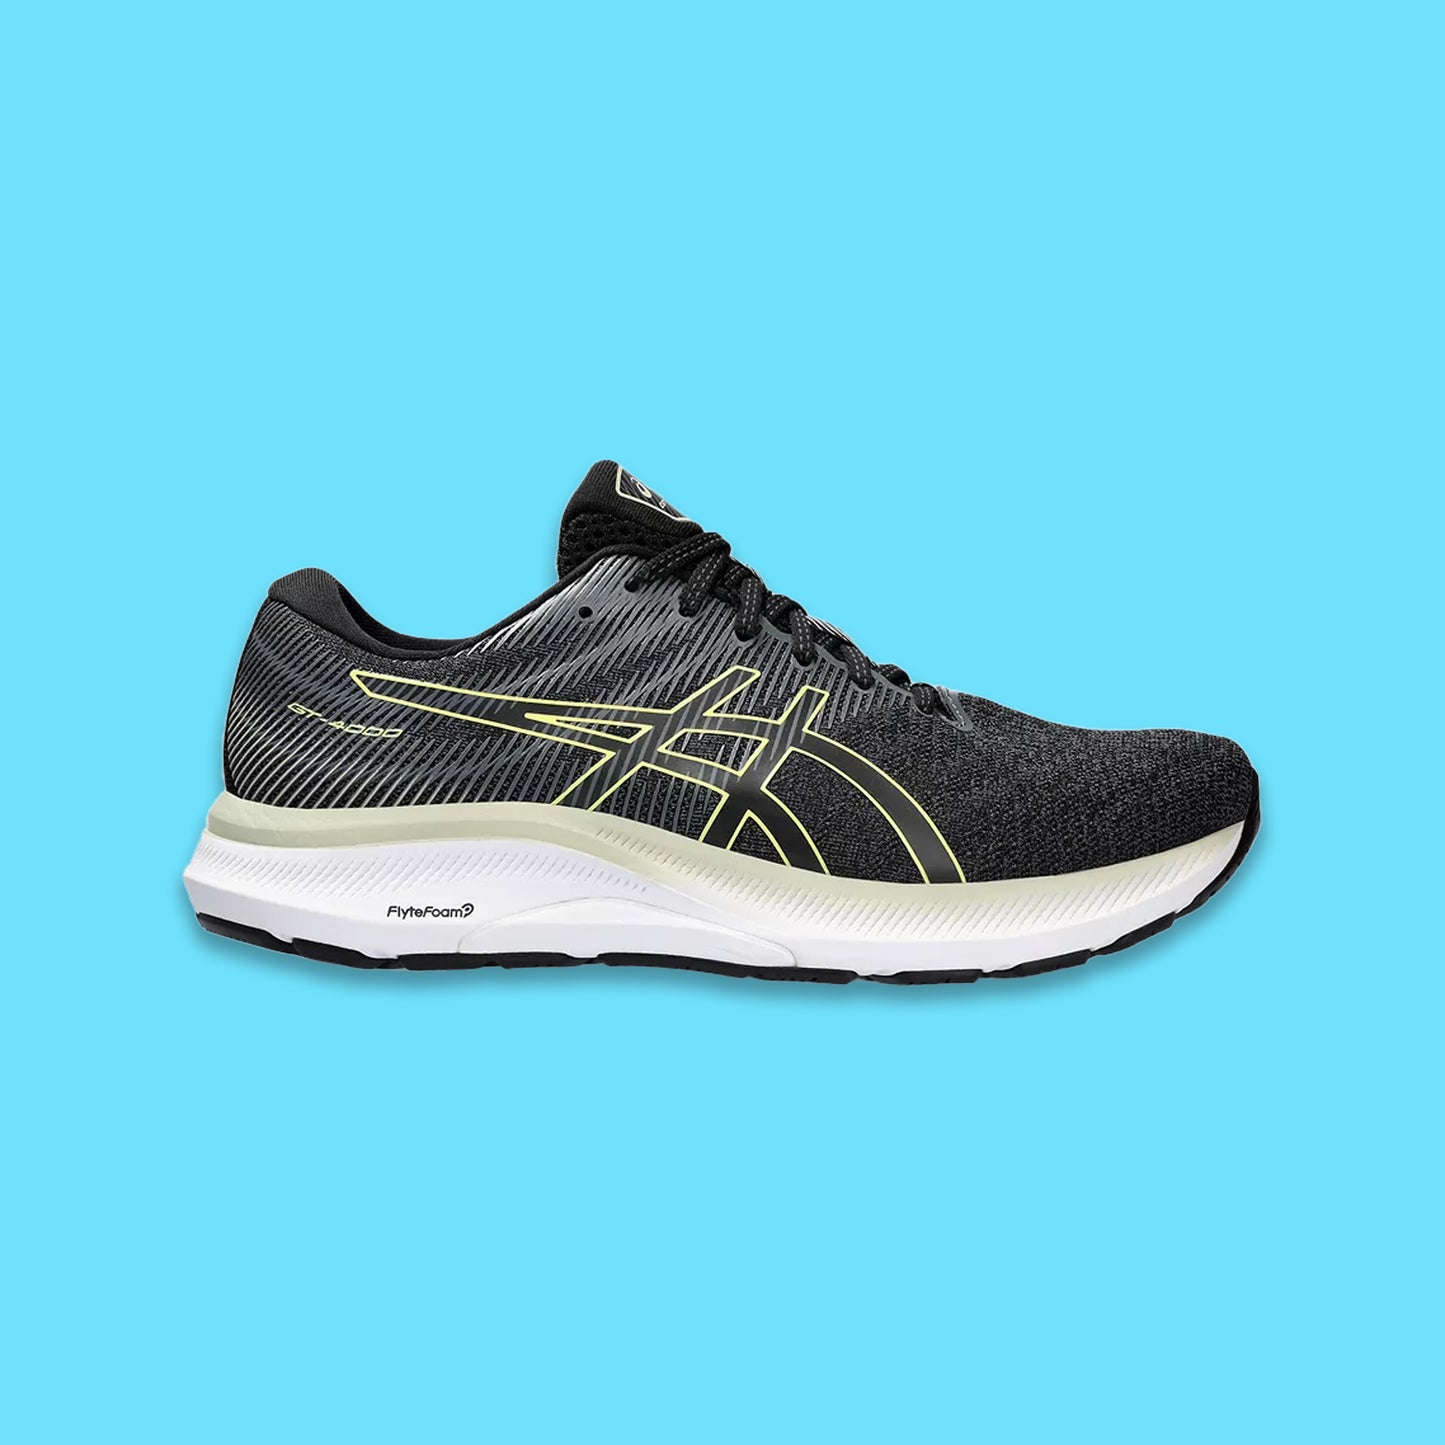 Men's GT-4000 3 - Cushioned and Supportive Running Shoes